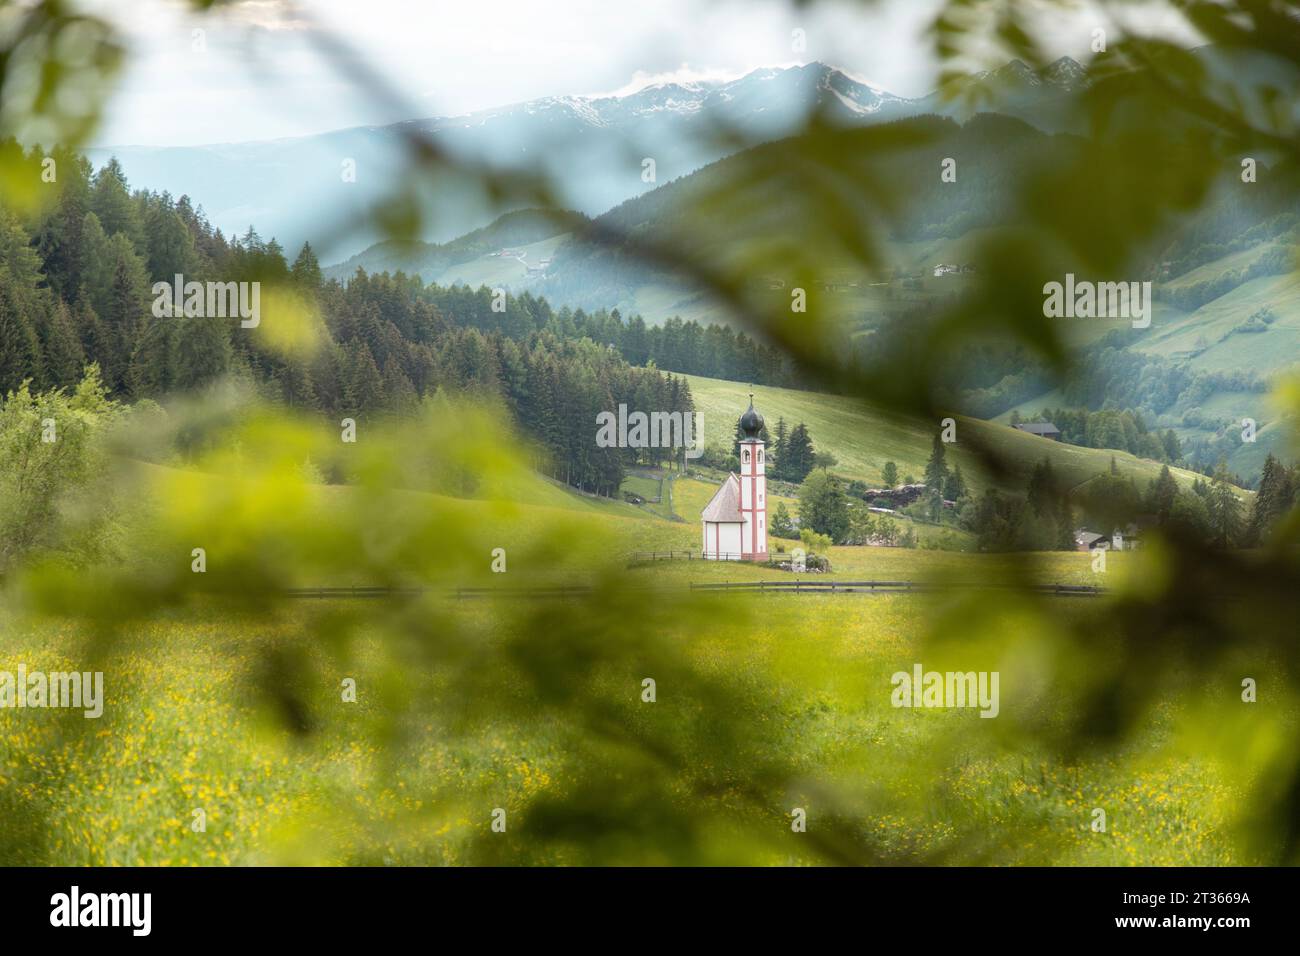 Church of St. Magdalena in front of mountains and pine forest Stock Photo